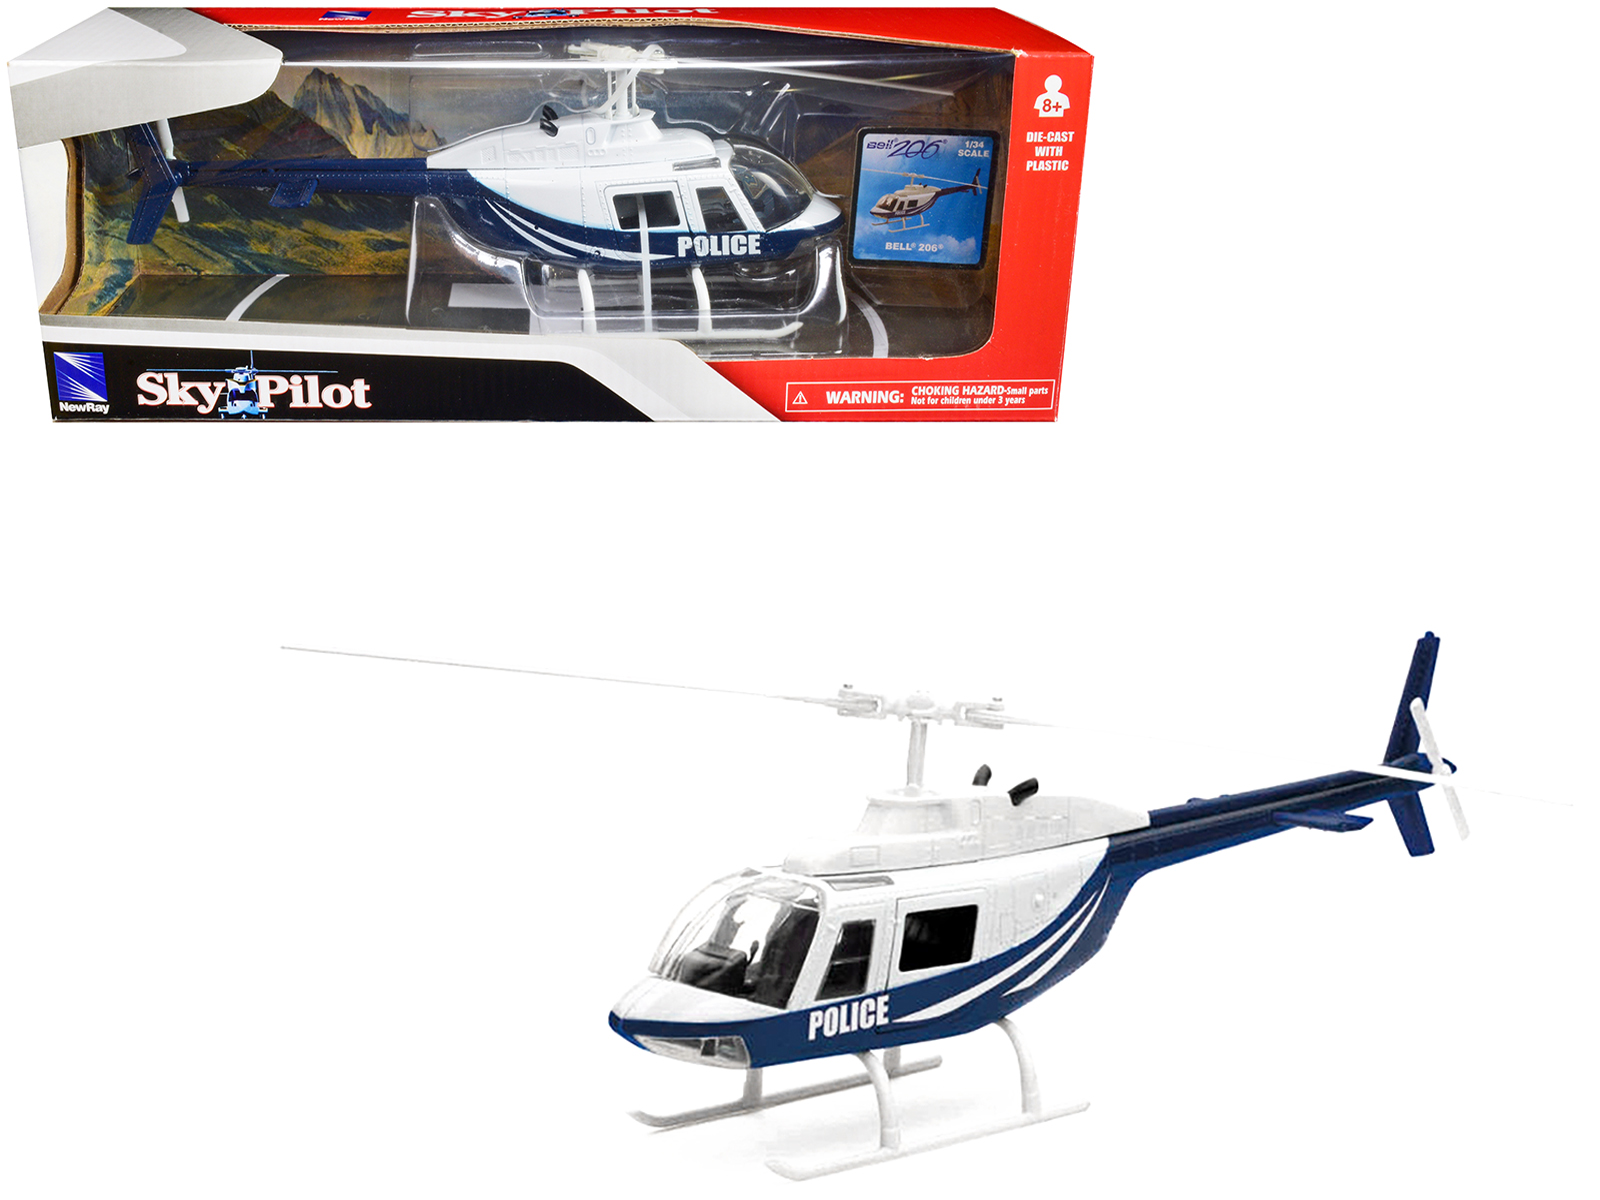 New Ray Bell 206 Helicopter Dark Blue and White "Police" "Sky Pilot" Series 1/34 Diecast Model by New Ray